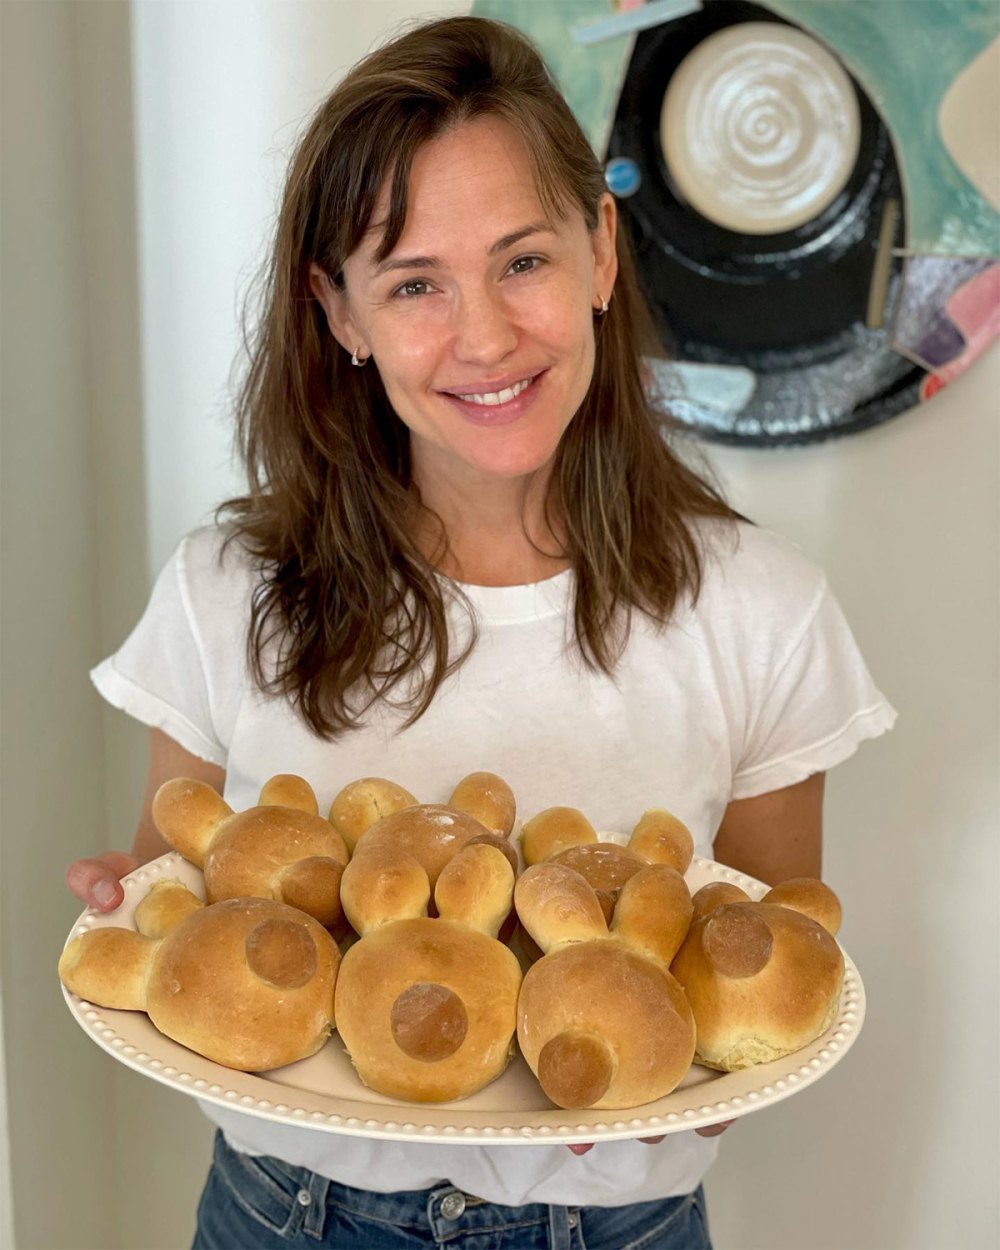 Jennifer Garner's Funniest Food Fails and Recipe Attempts Through the Years